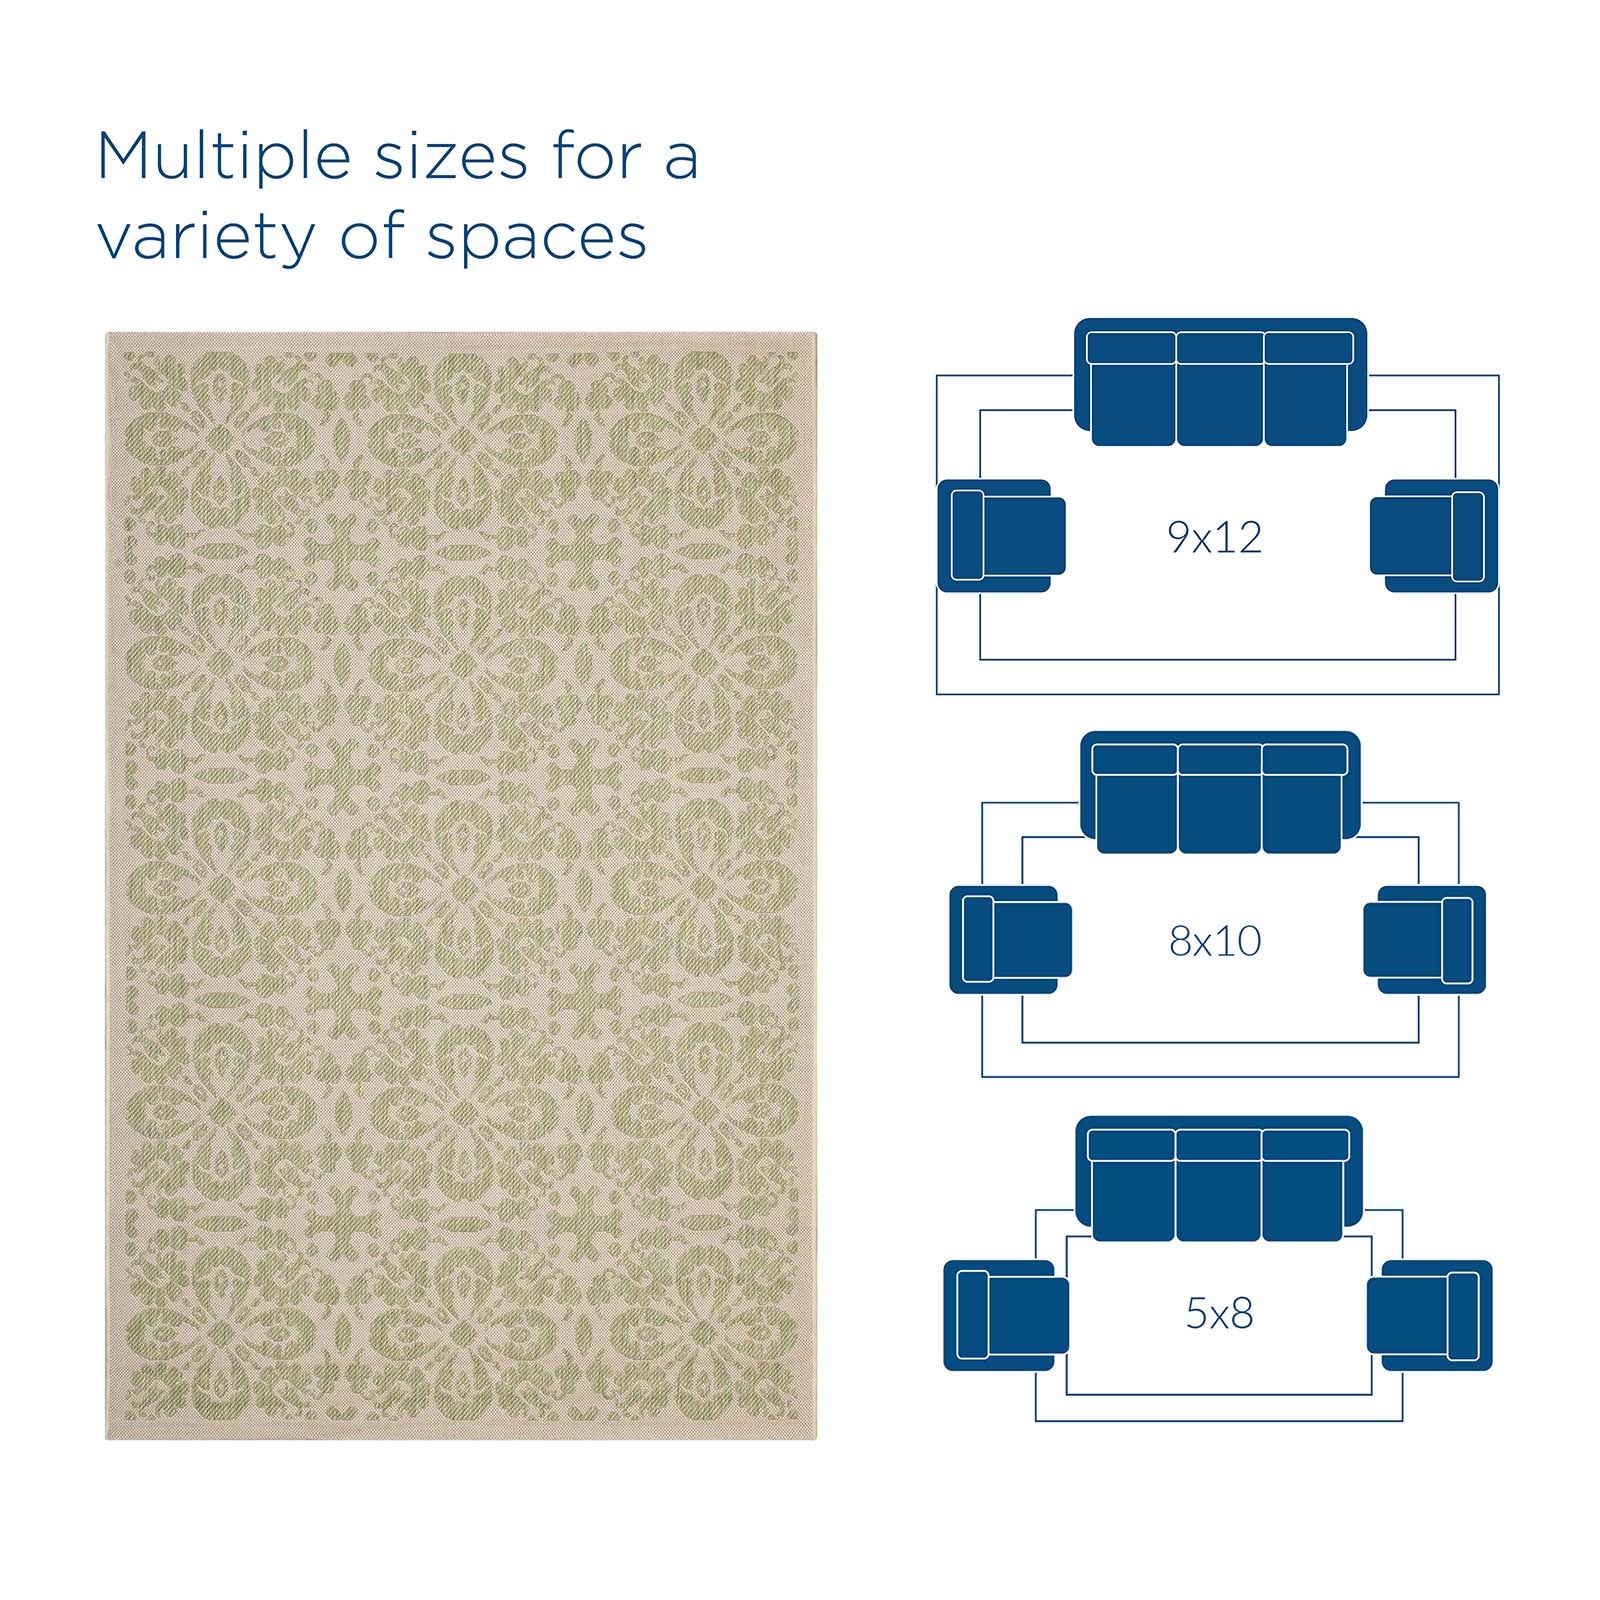 Modway Outdoor Rugs - Ariana Vintage Floral Trellis 9'x12' Outdoor Area Rug Light Green & Beige